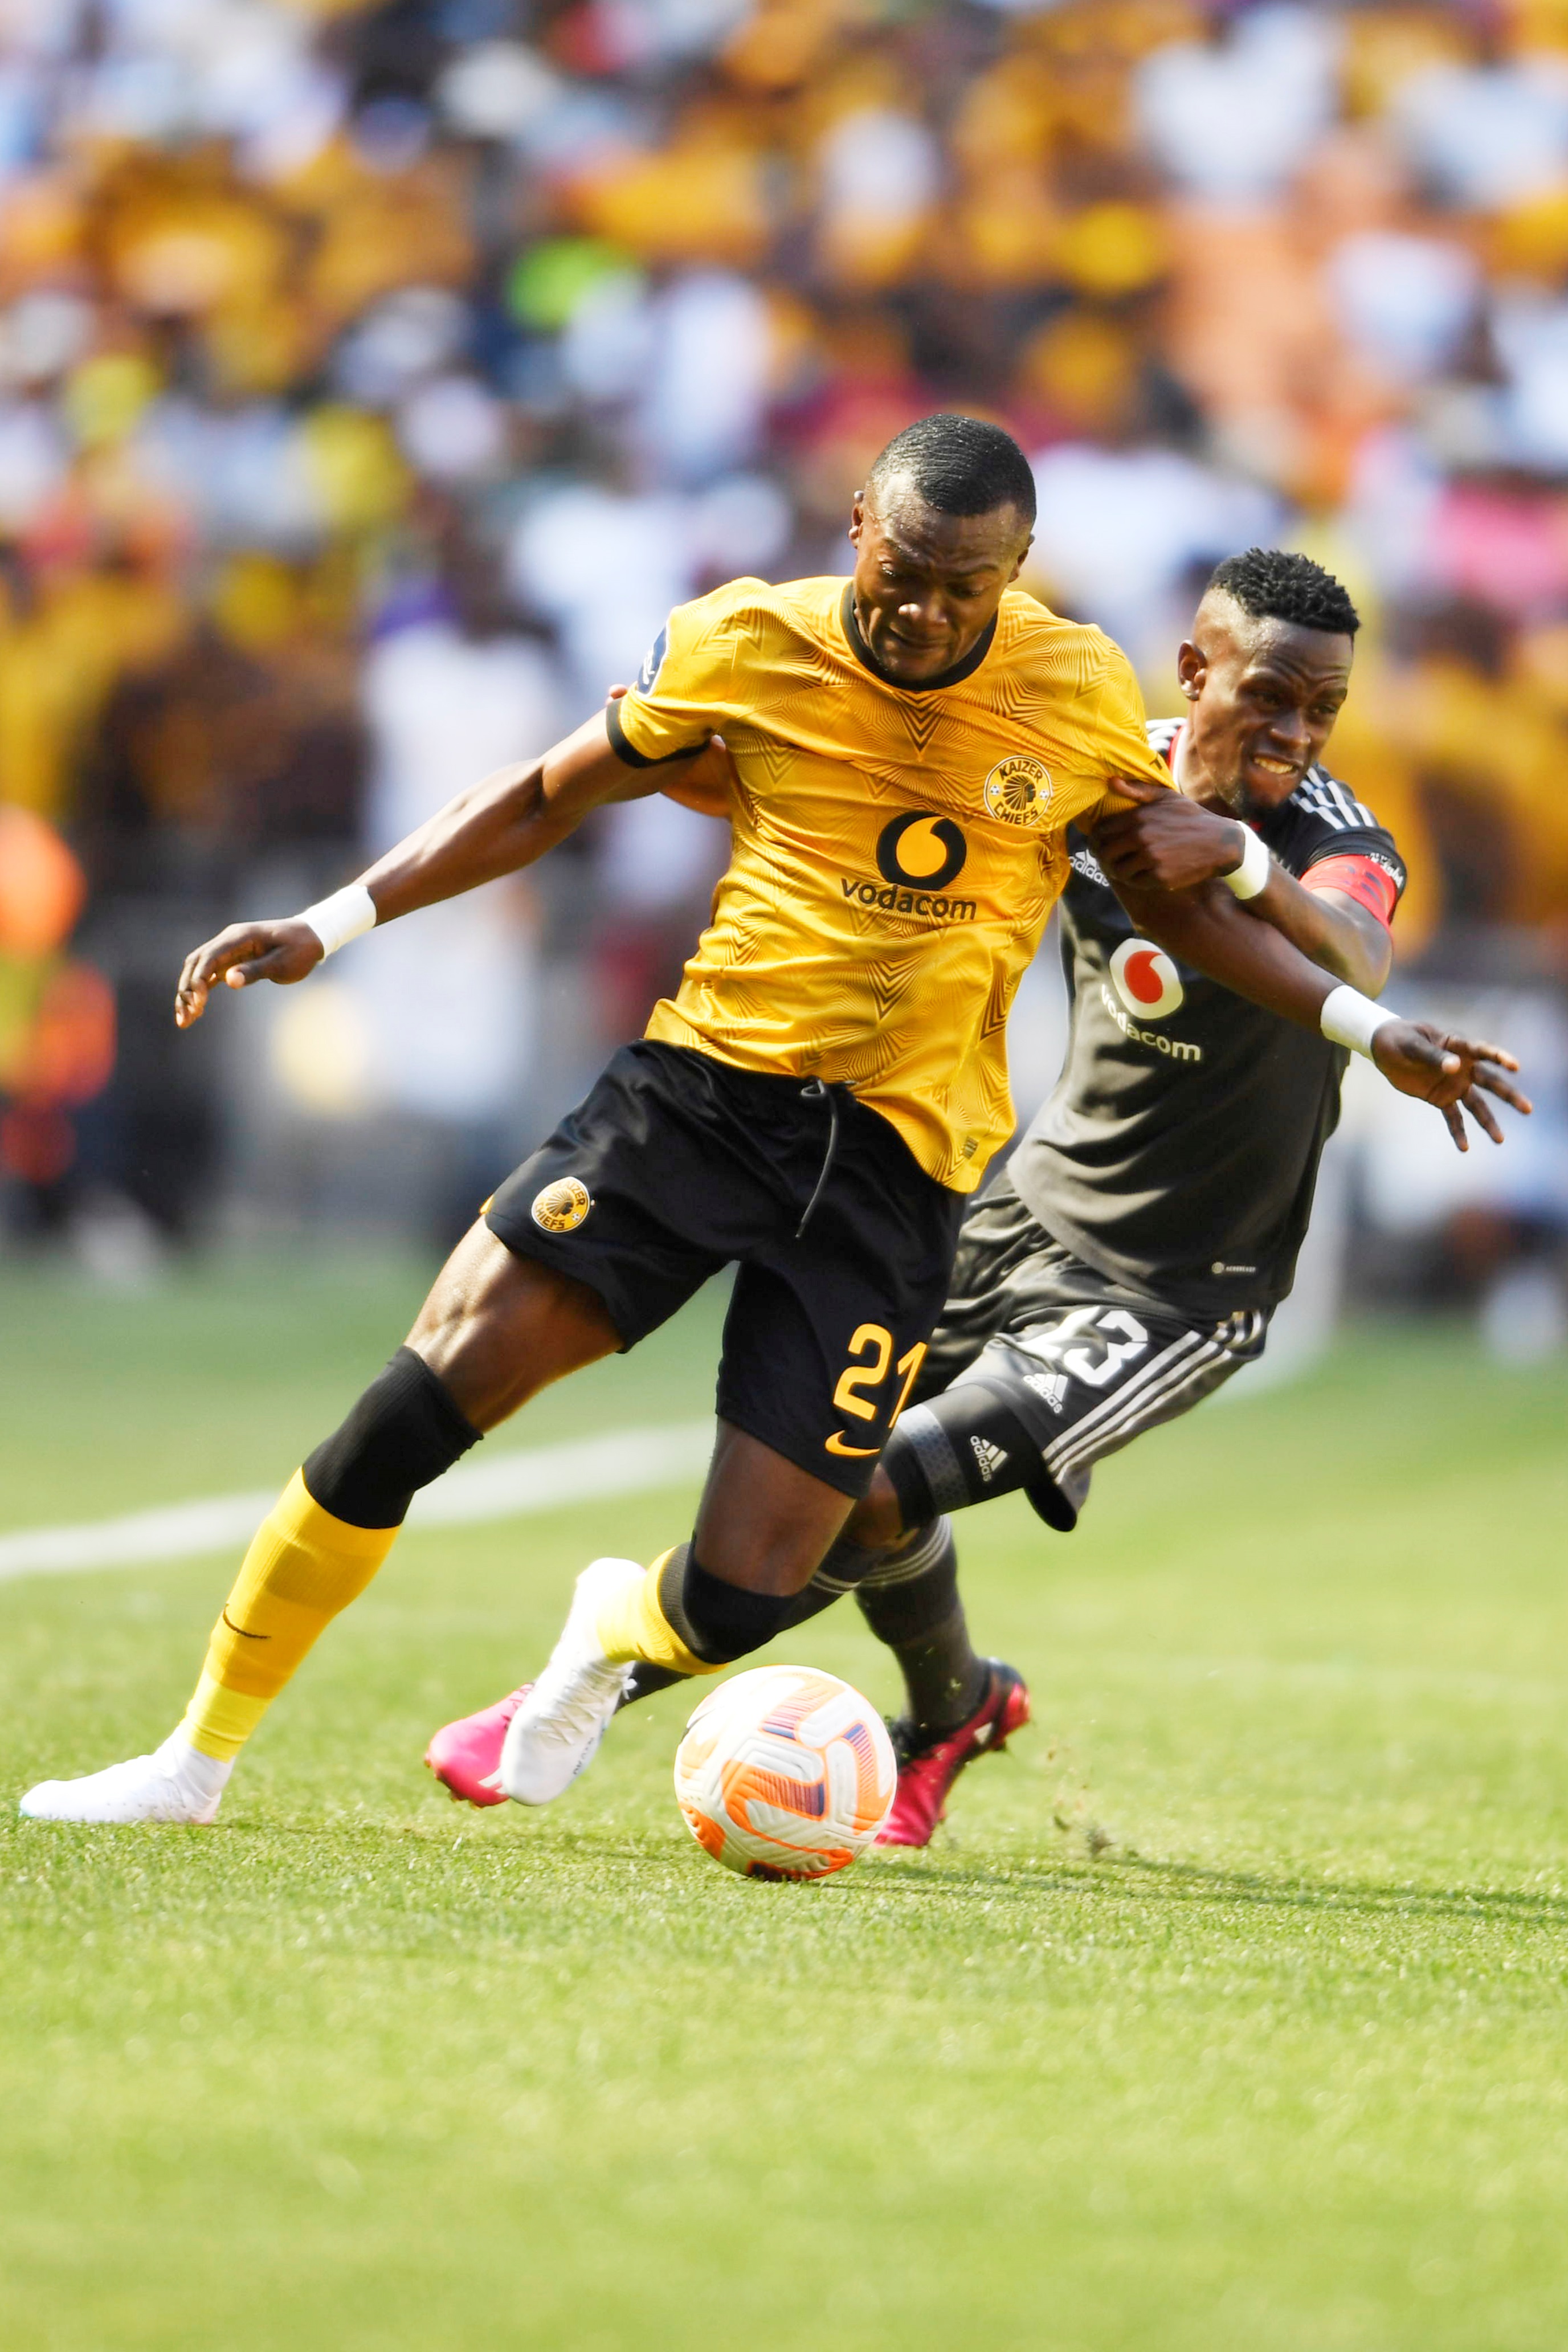 VOTE: Who has the best kit out of Chiefs, Pirates and Sundowns?